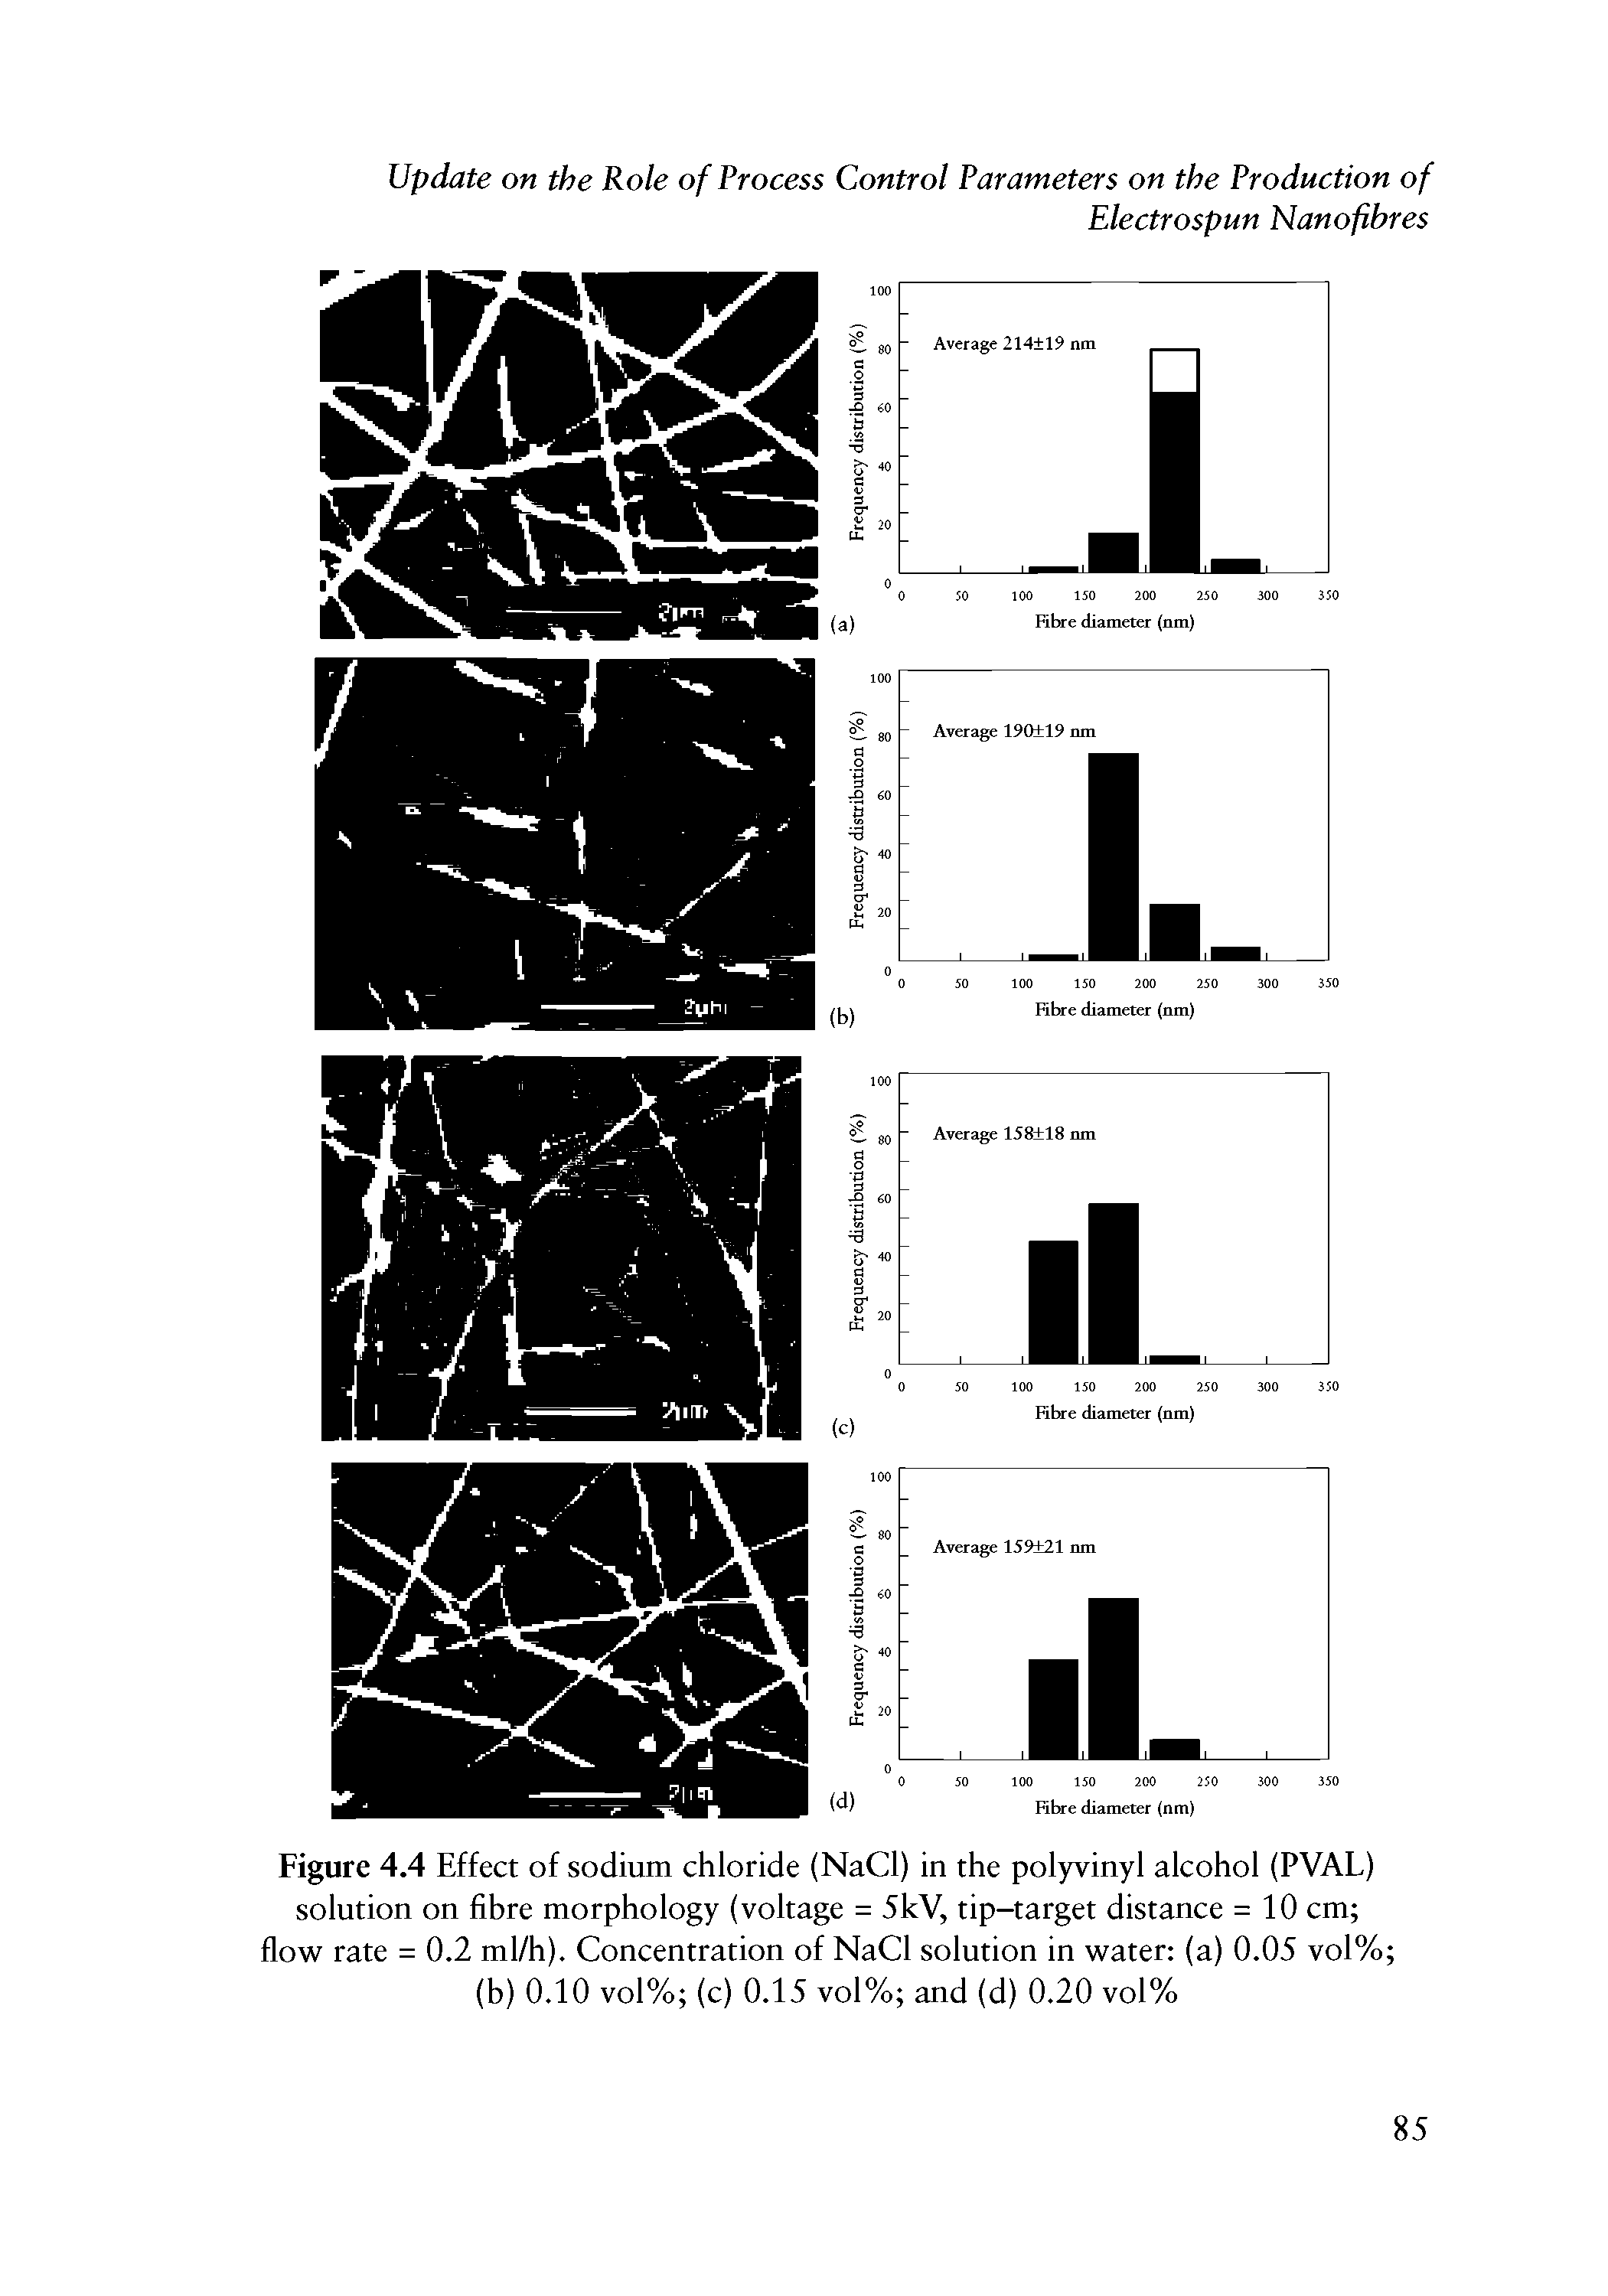 Figure 4.4 Effect of sodium chloride (NaCl) in the polyvinyl alcohol (PVAL) solution on fibre morphology (voltage = 5kV, tip-target distance = 10 cm flow rate = 0.2 ml/h). Concentration of NaCl solution in water (a) 0.05 vol% (b) 0.10 vol% (c) 0.15 vol% and (d) 0.20 vol%...